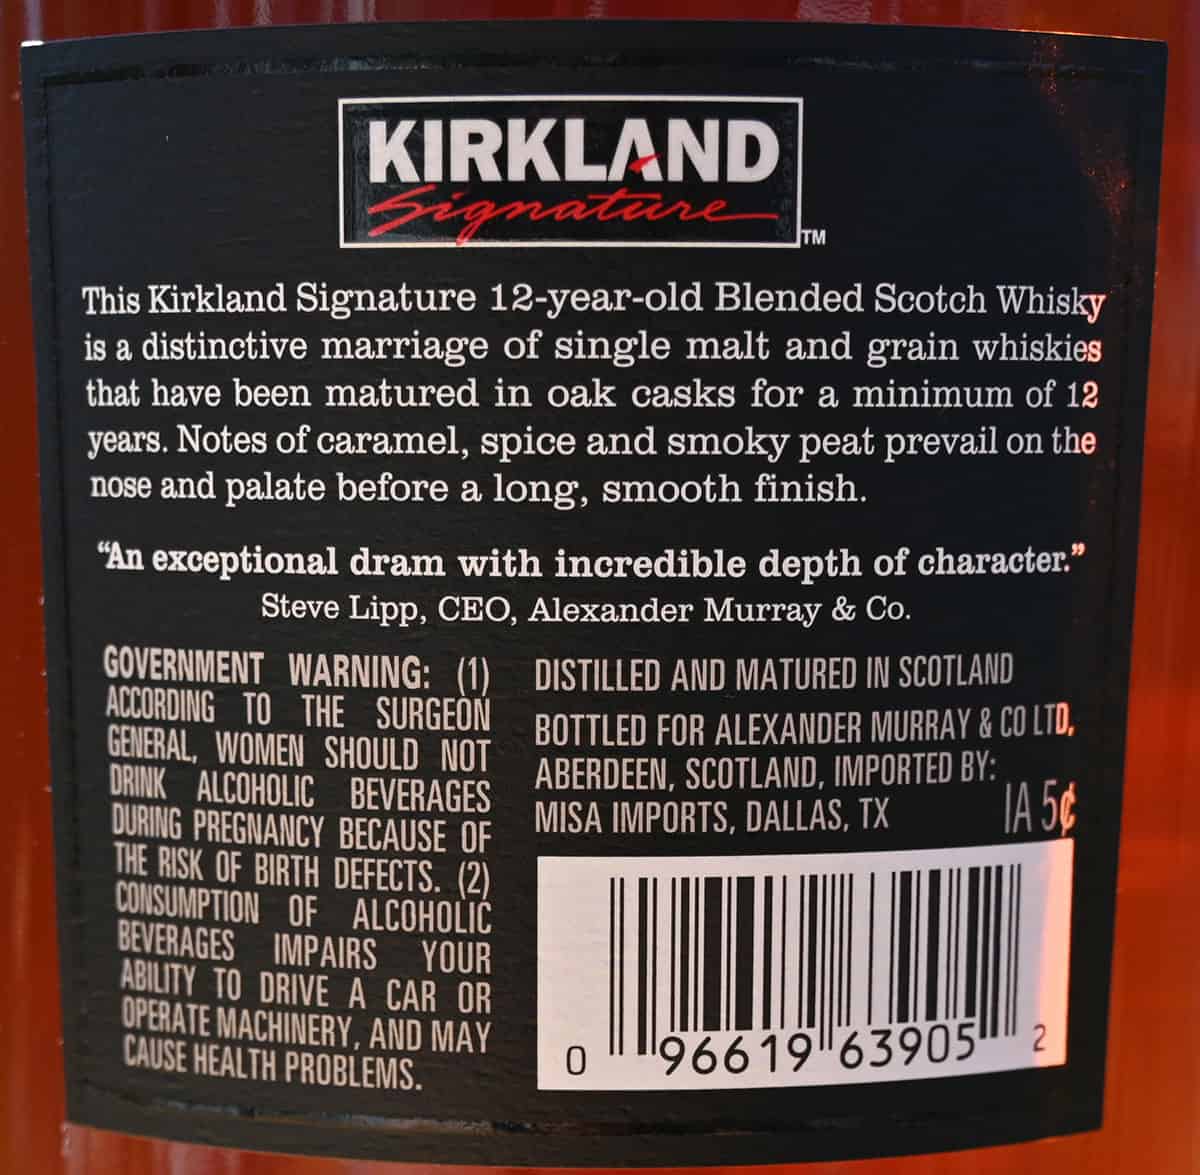 Costco 12 Years Old Blended Scotch Whisky product description on the label on the bottle.